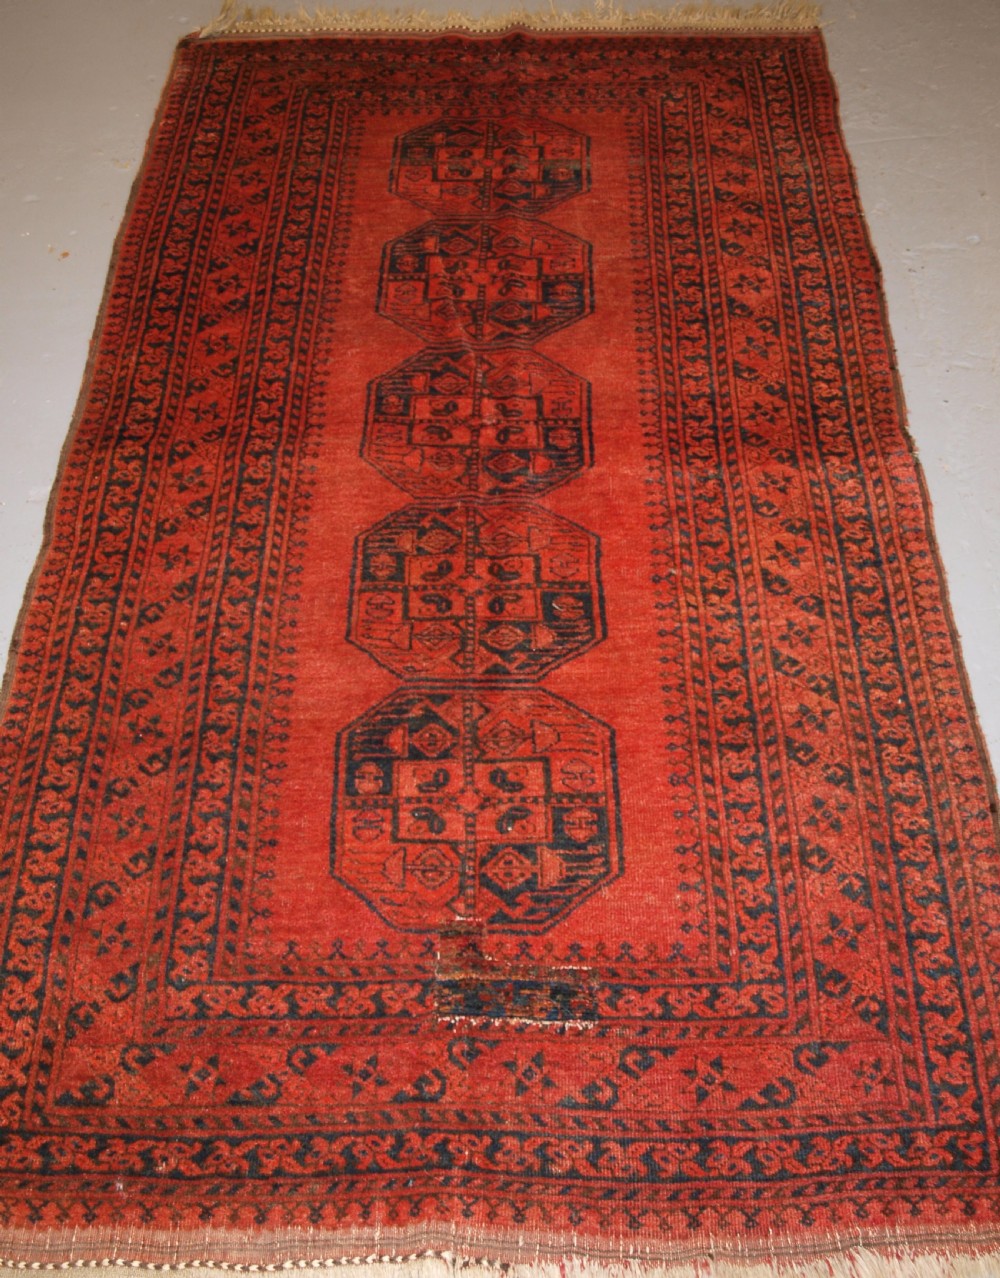 old north afghan village rug with superb colour low price due to old repair circa 1920